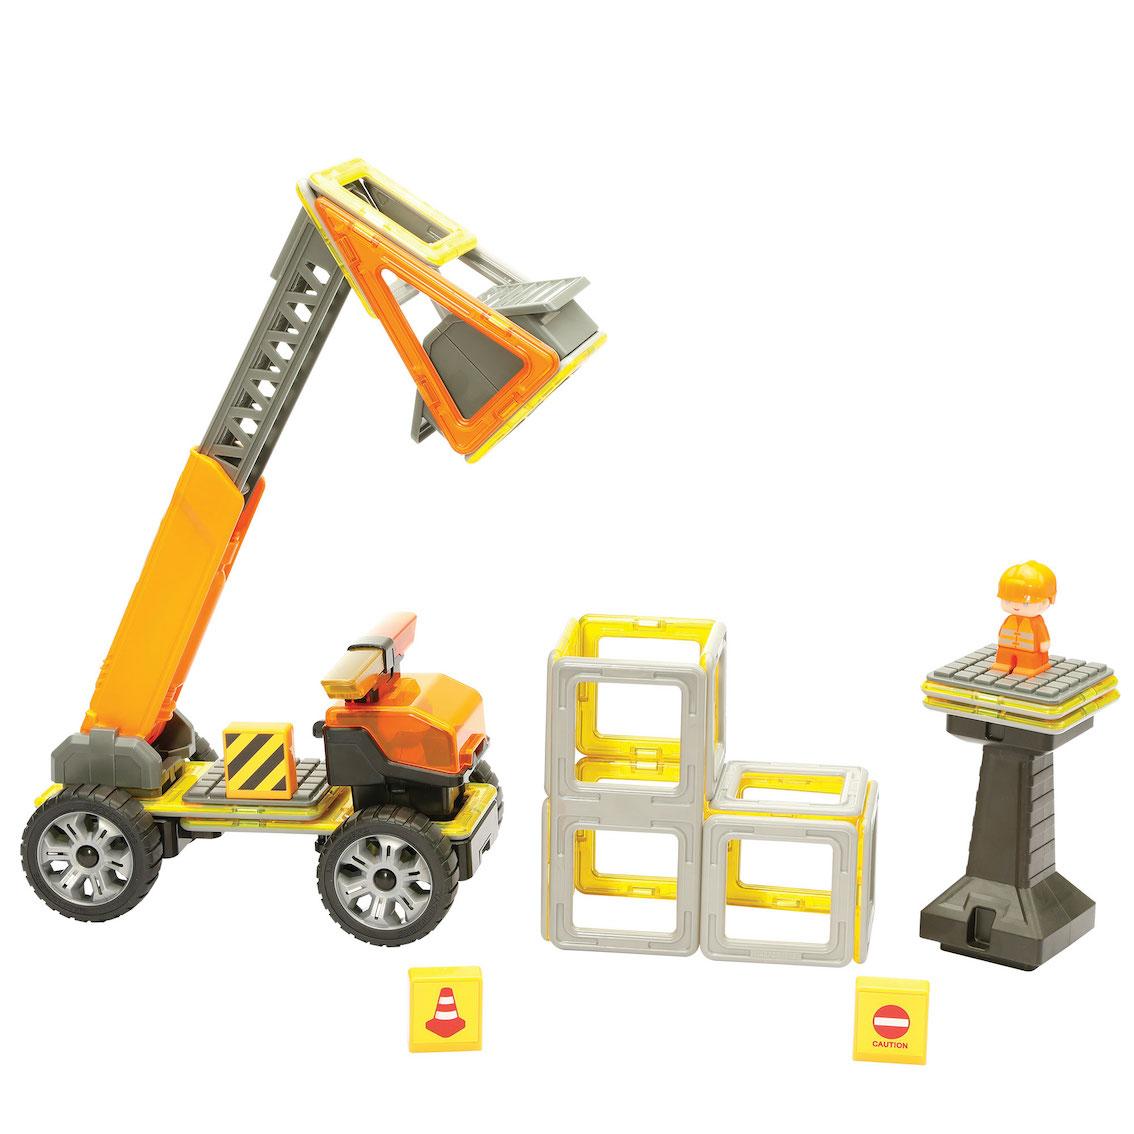 CHerry-picker on the left, blocks in the centre and a builder figure on a plinth on the right hand side - all built with Magformers parts.